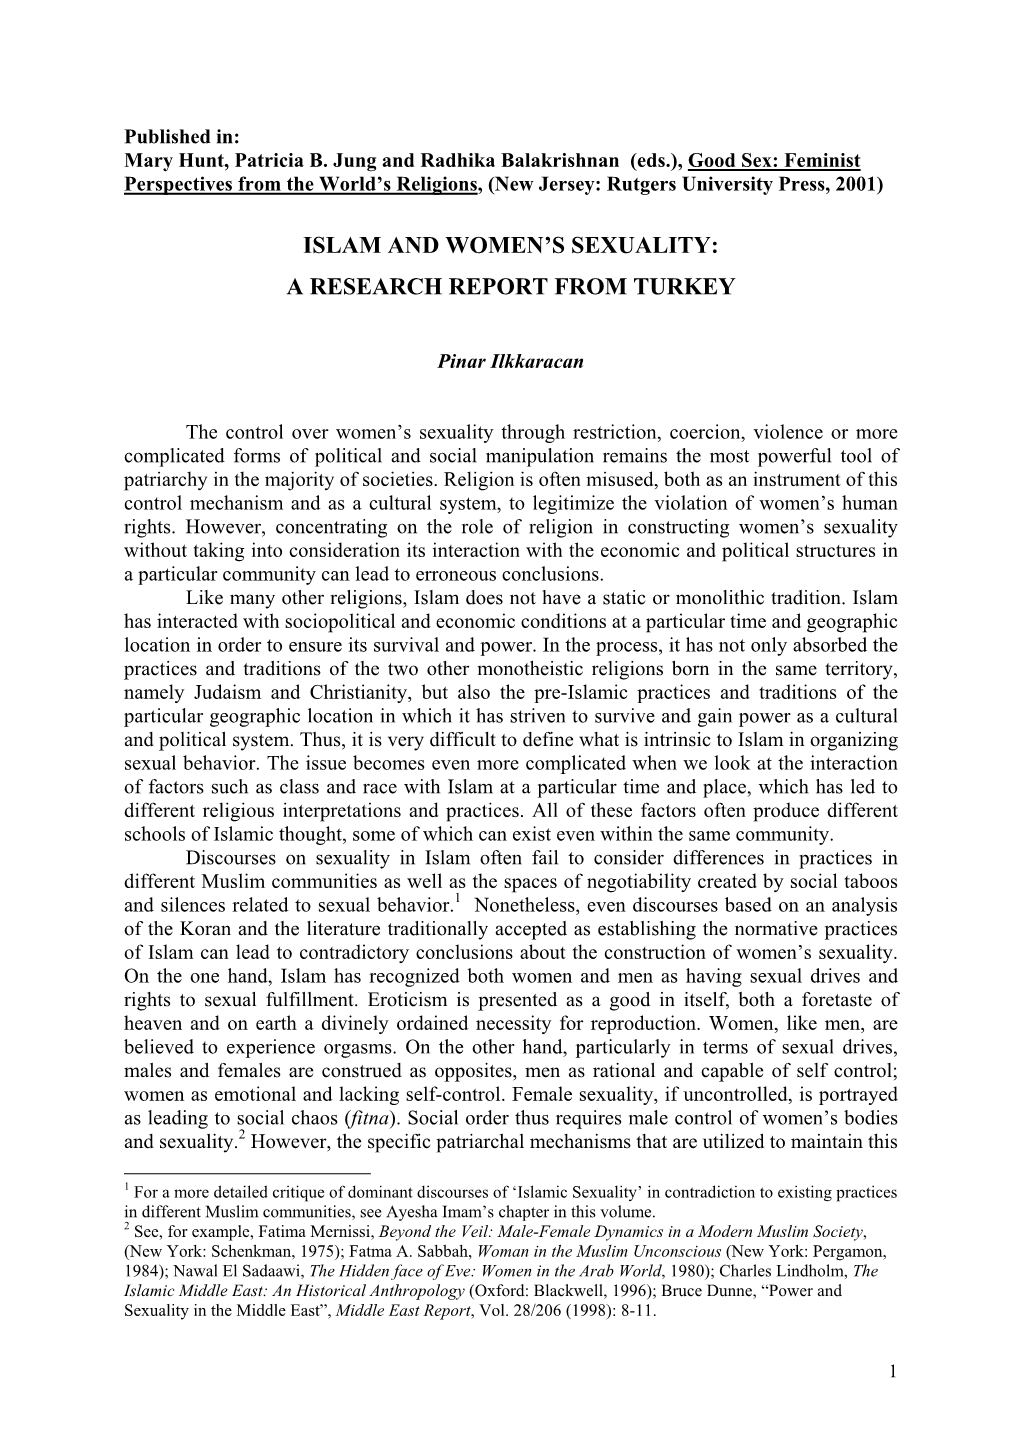 Islam and Women's Sexuality: a Research Report from Turkey